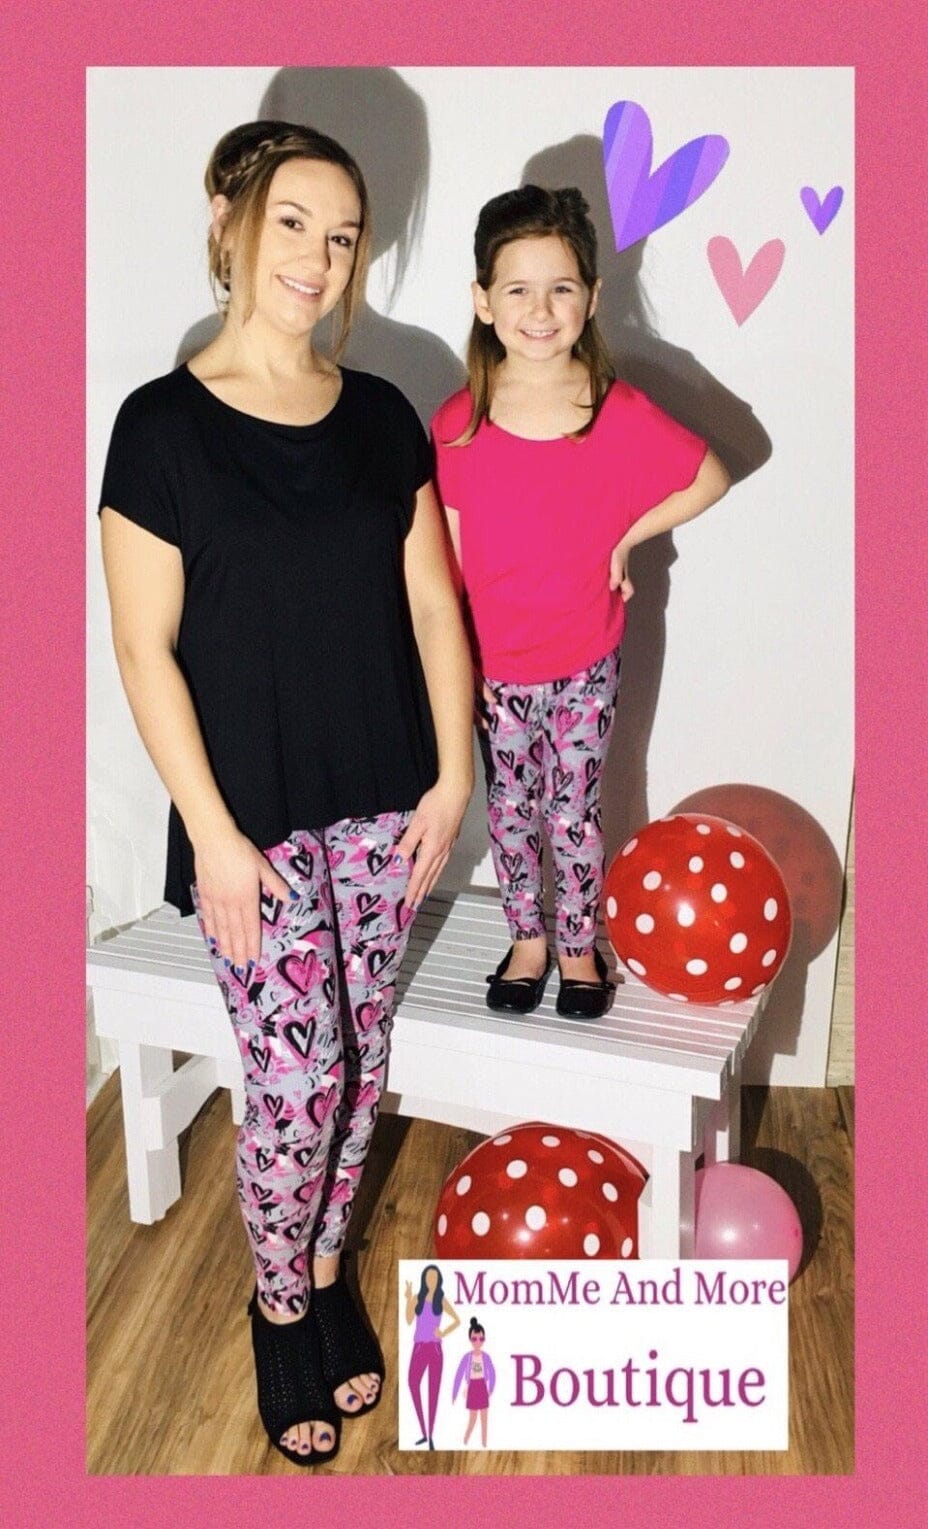 Girls Leggings | Pink Heart Valentines Day Leggings | Kids Yoga Pants |  Footless Tights | No-Roll Waistband